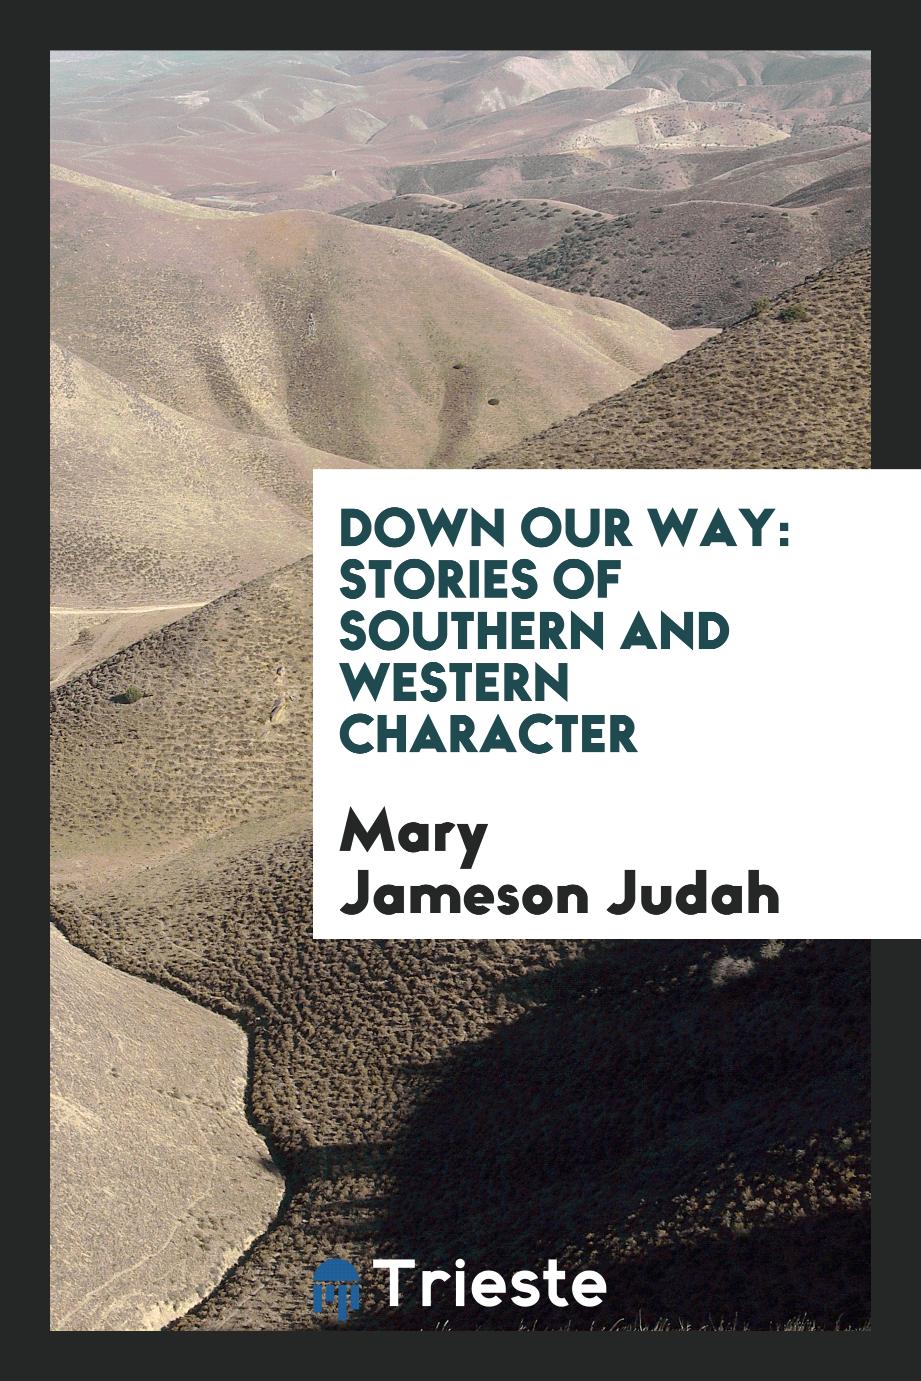 Down our way: stories of Southern and Western character